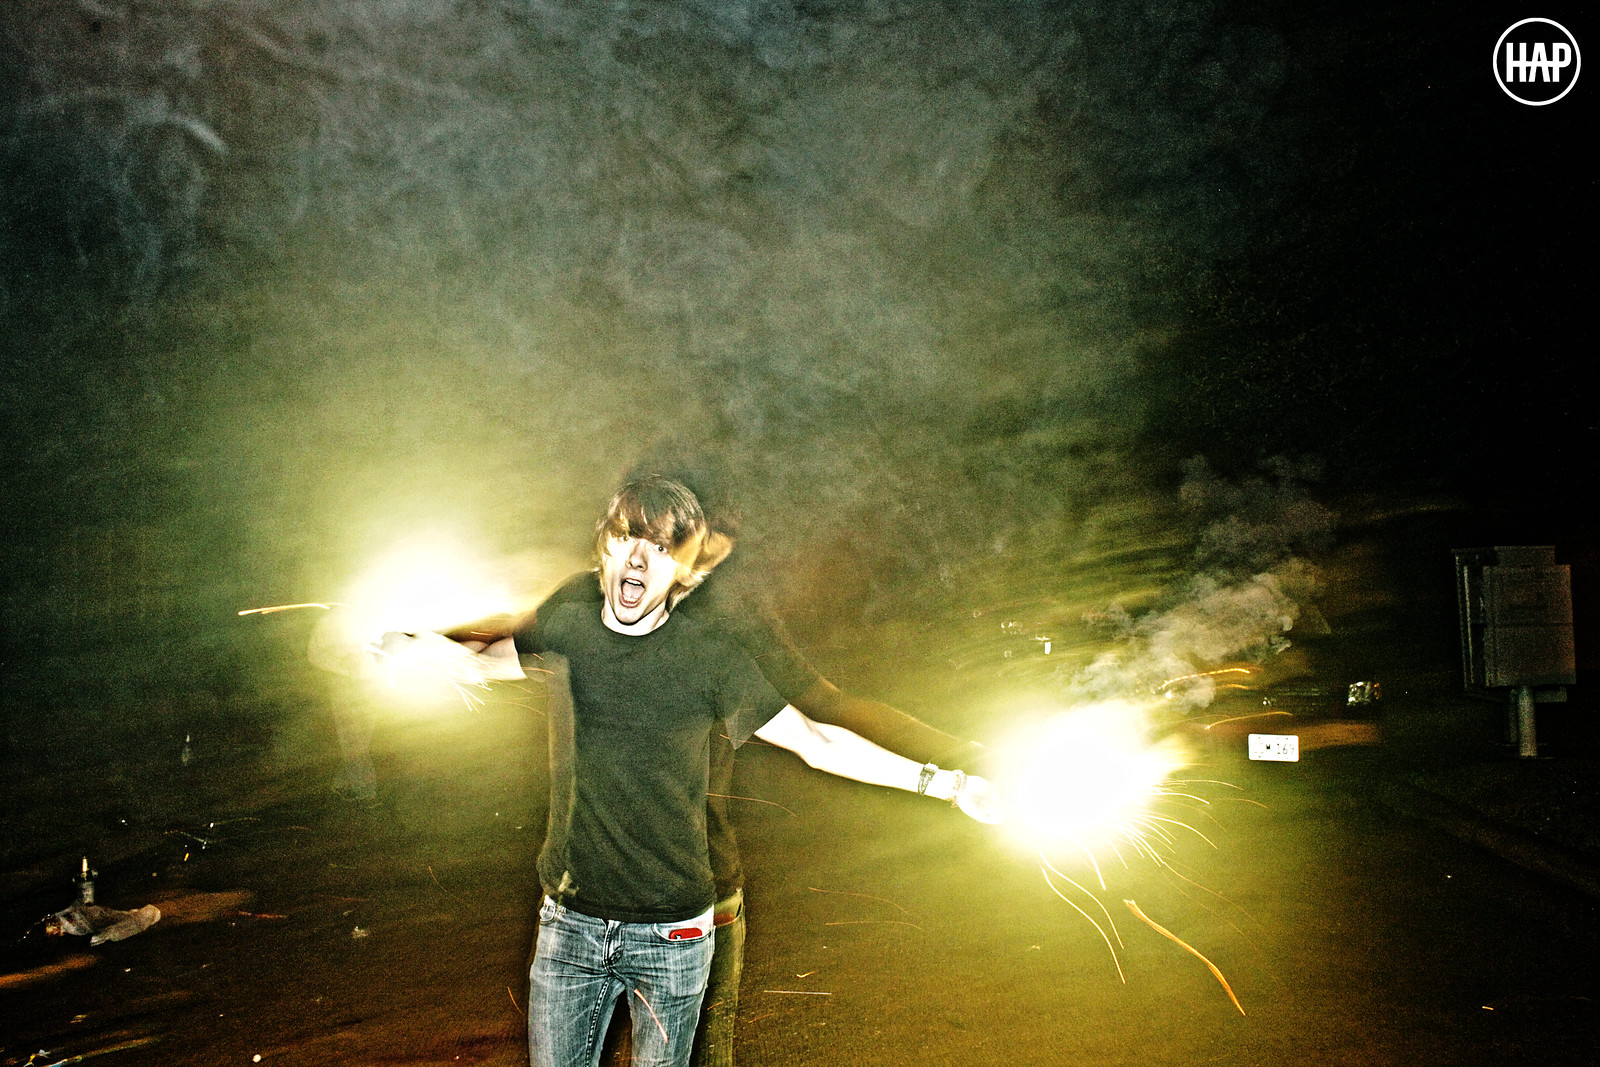 Awsten with sparklers on New Years Eve 2012 by Heather Ann Phillips on Flickr